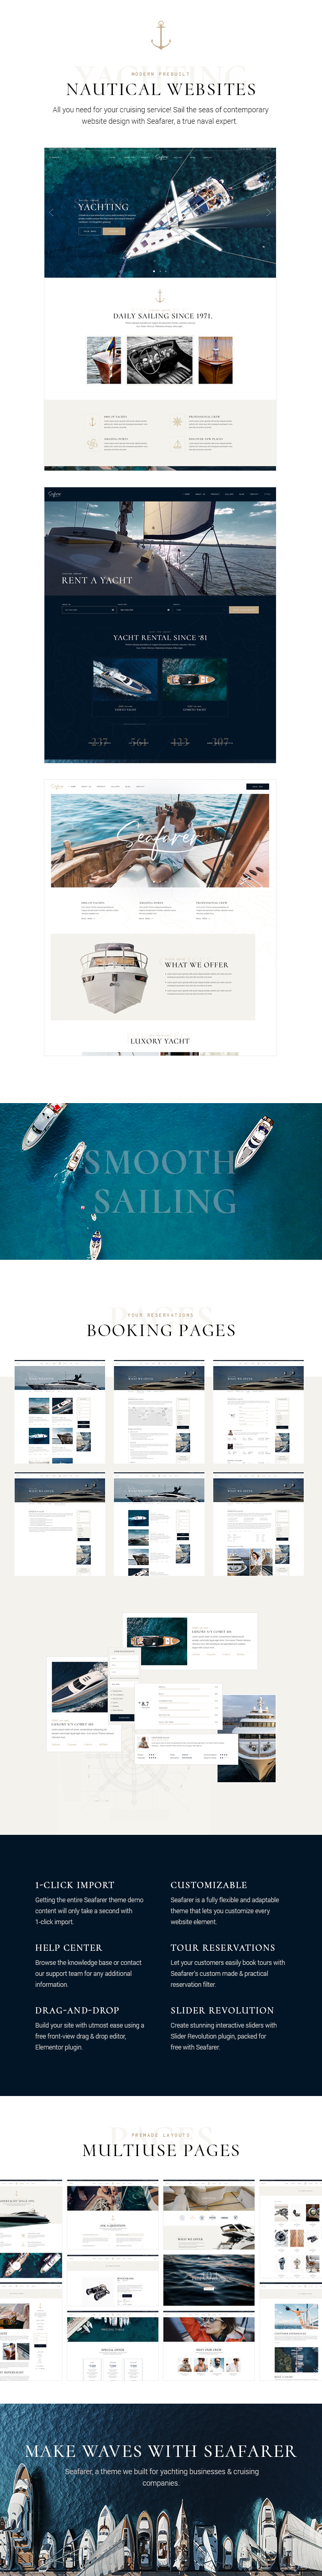 Seafarer - Yacht and Boat Rental Theme - 3